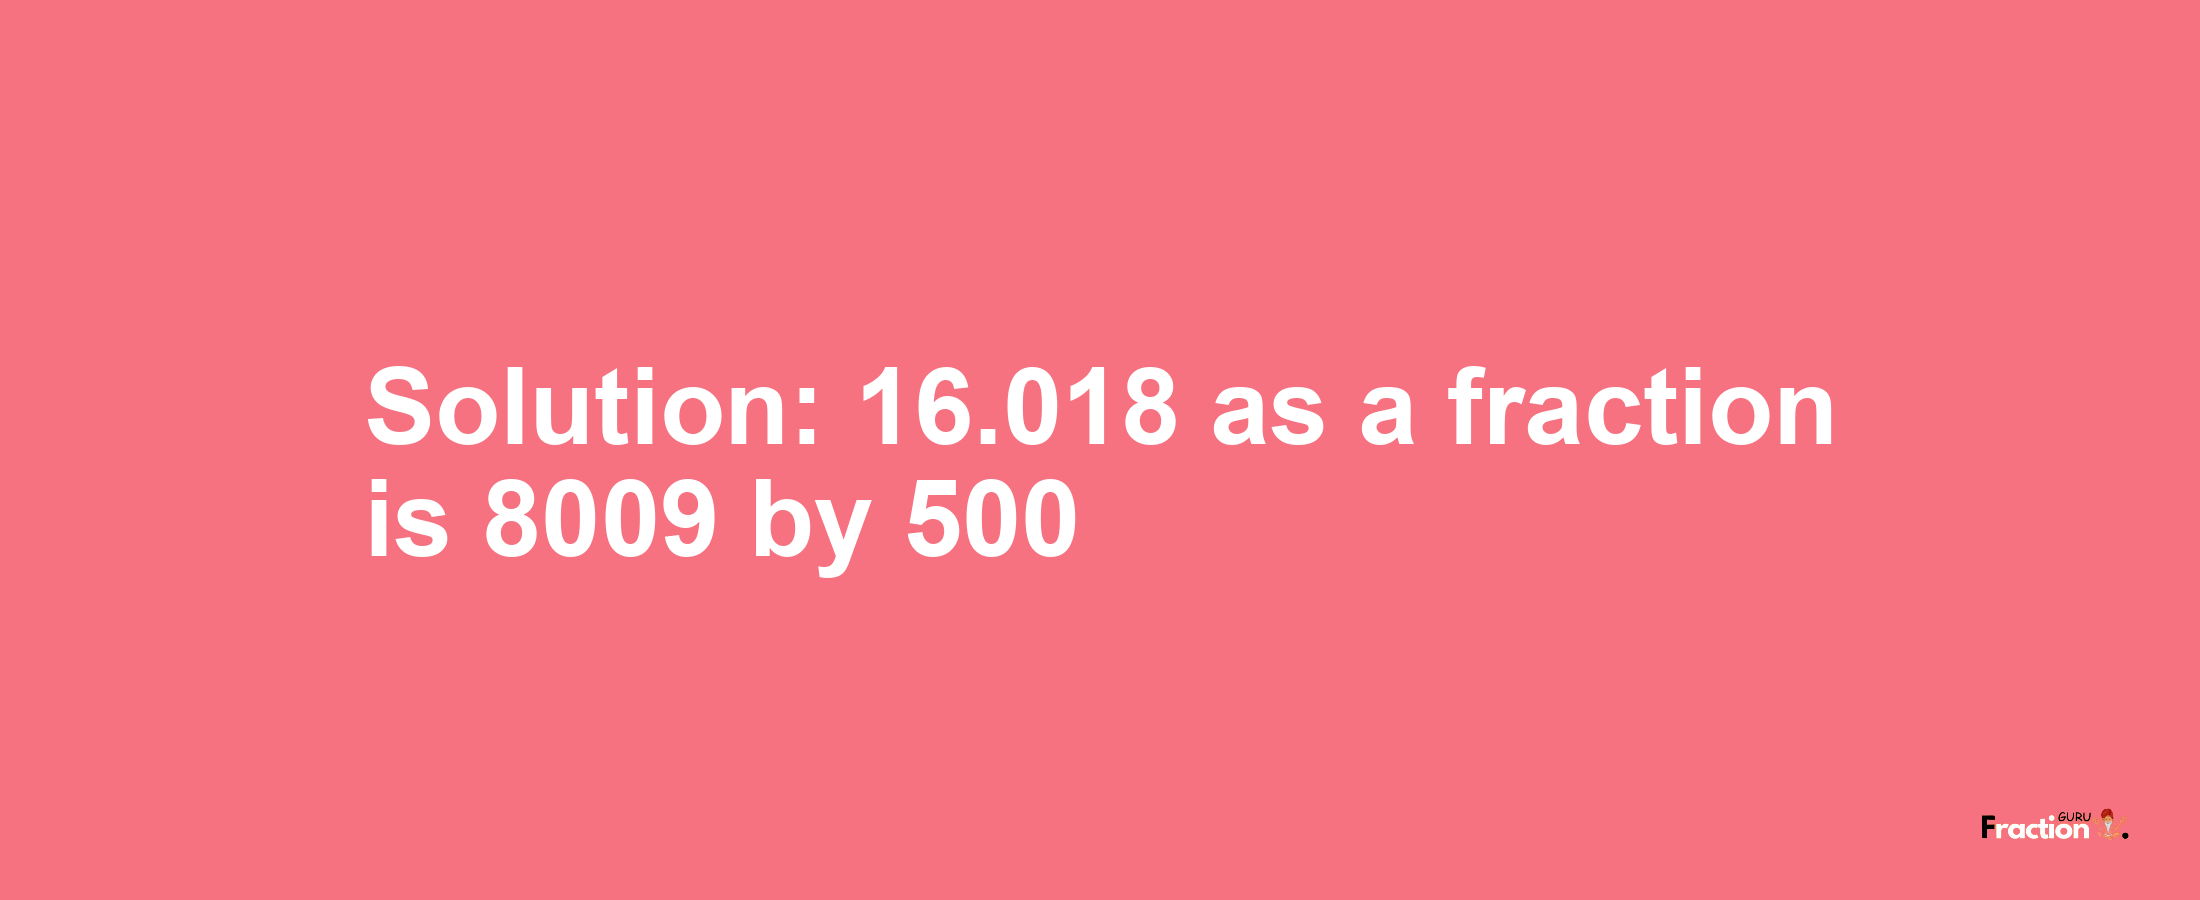 Solution:16.018 as a fraction is 8009/500